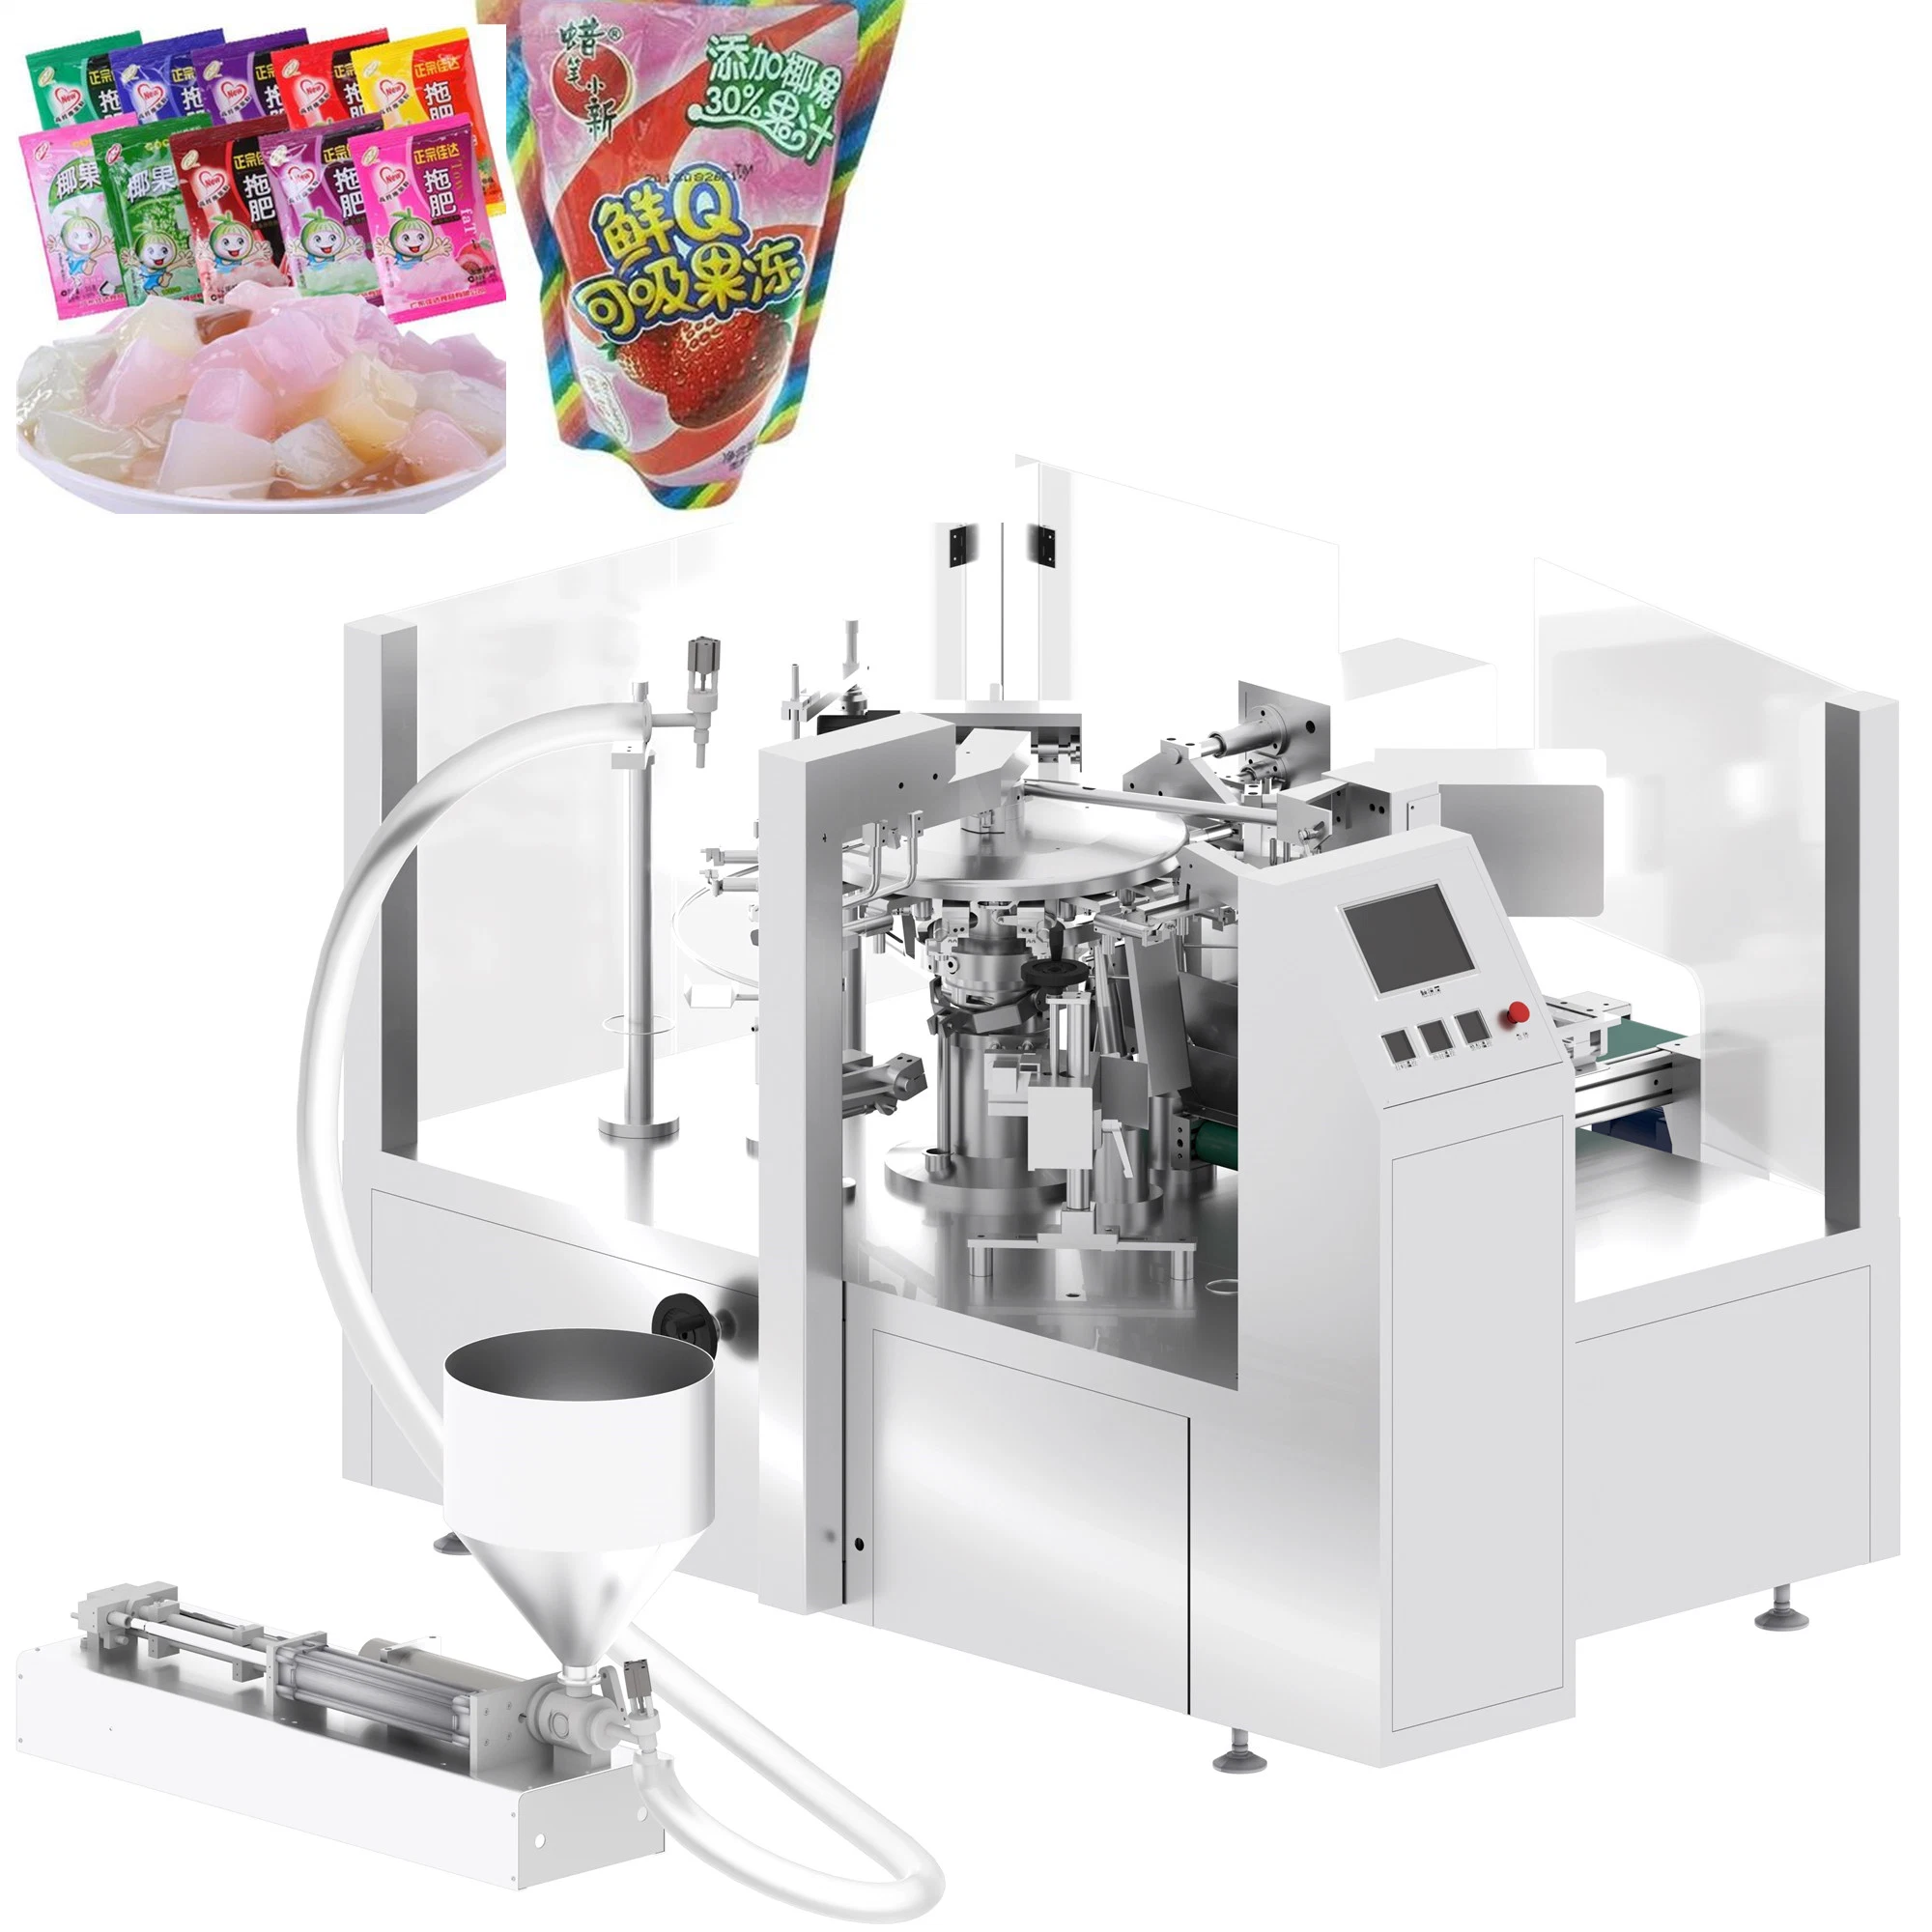 Liquid Jelly Beverage Fruit Juice Tea Cow's Milk Mineral Water Stretch Wrapping Filling Pack Sealing Wrap Shrink Packaging Vertical Pillow Auto Packing Machine